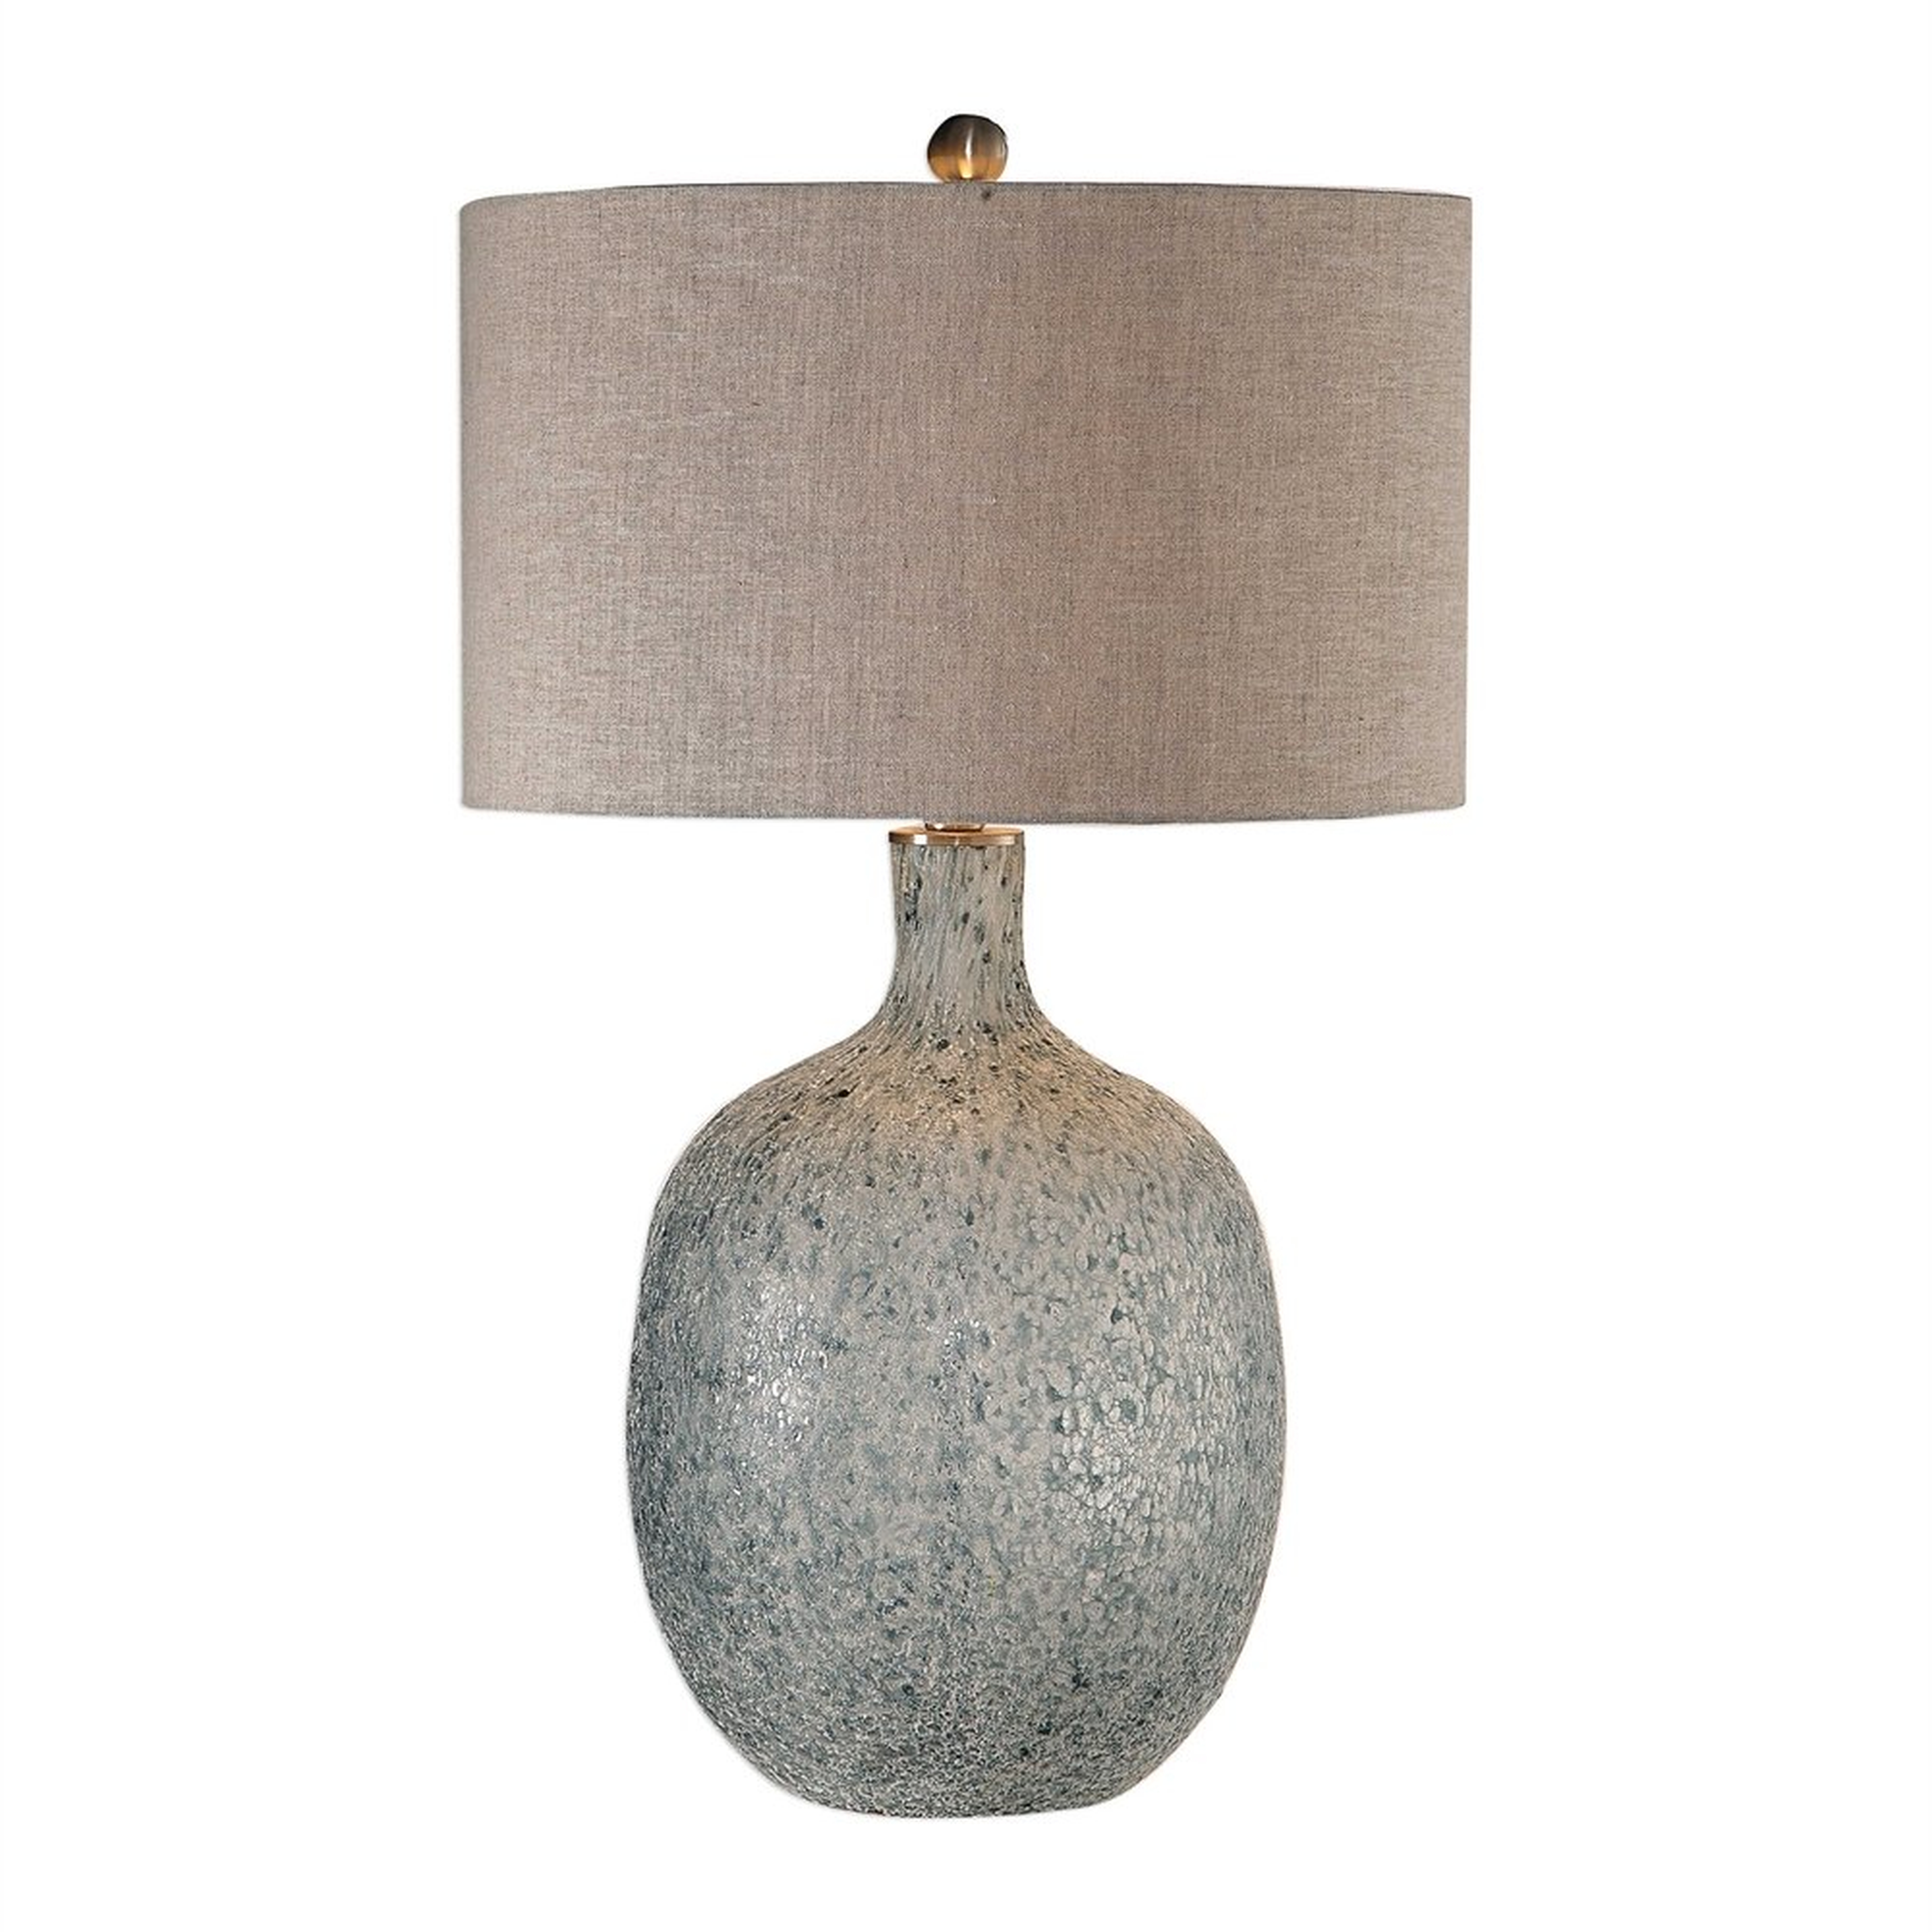 OCEAONNA TABLE LAMP - Hudsonhill Foundry